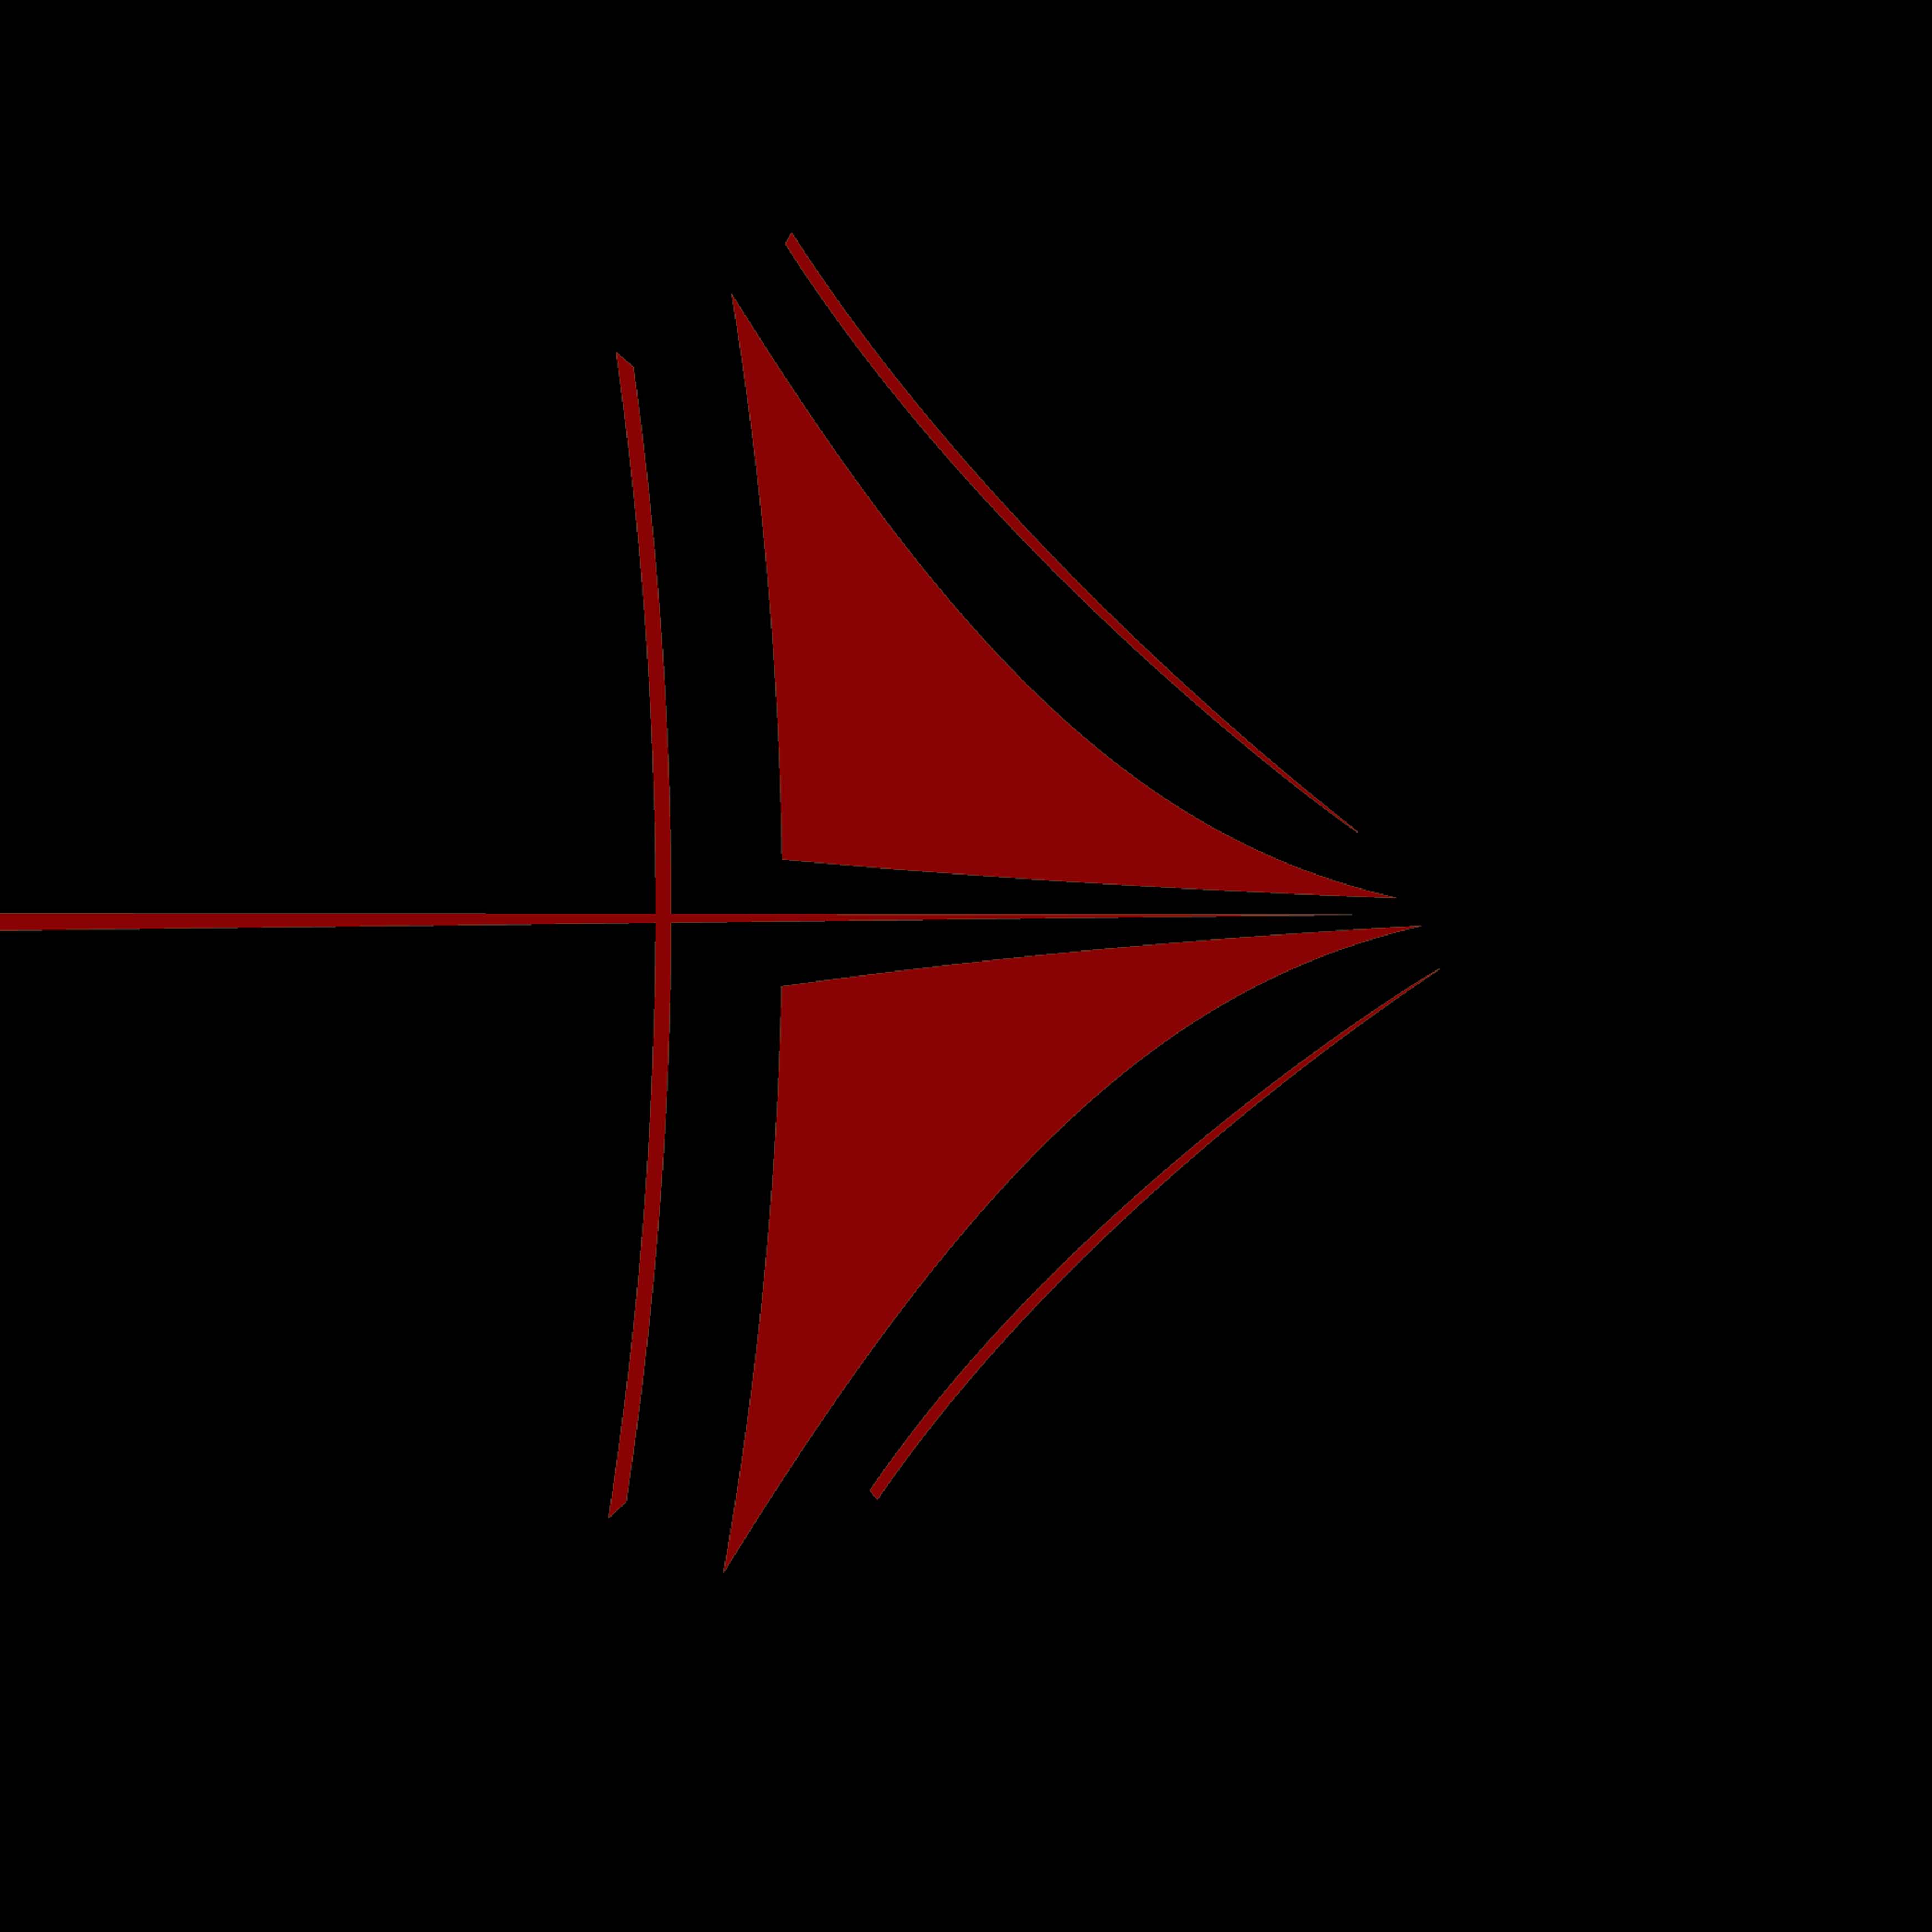 warped red arrow head with a black line crossing over the middle of it forming an 'E' in the blank space around the arrowhead